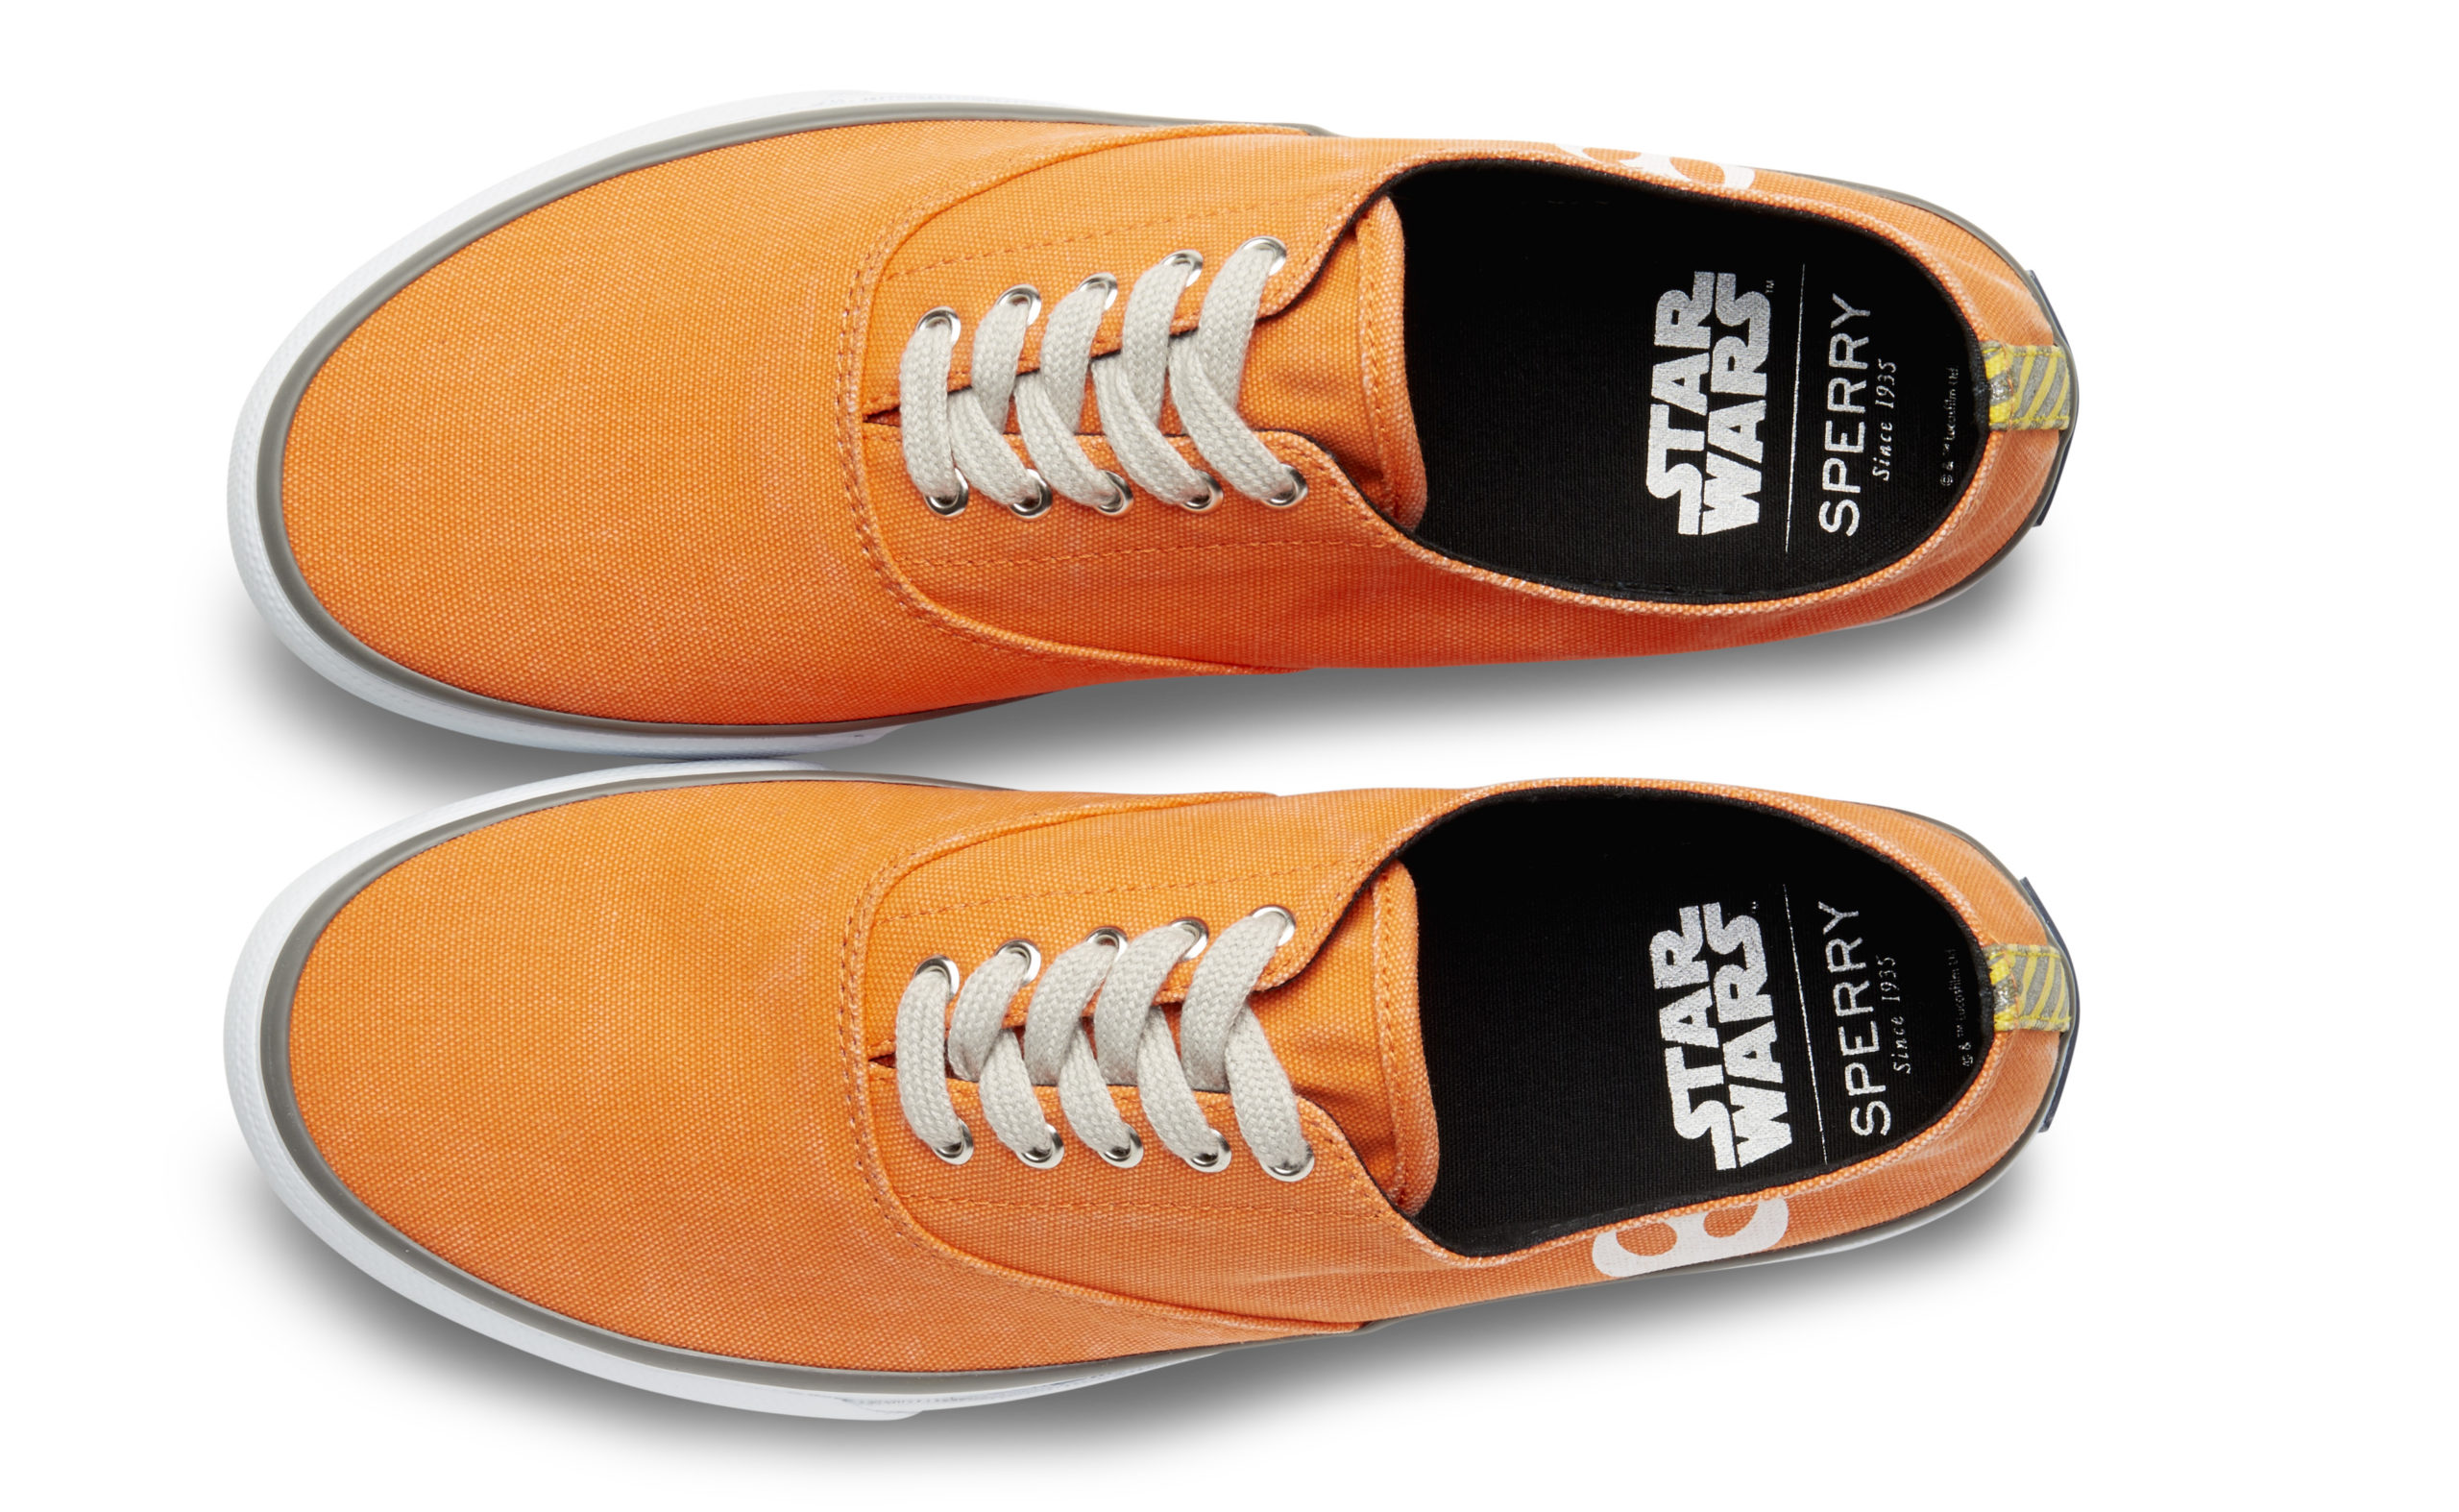 Um, These Star Wars Sneakers Are Awesome